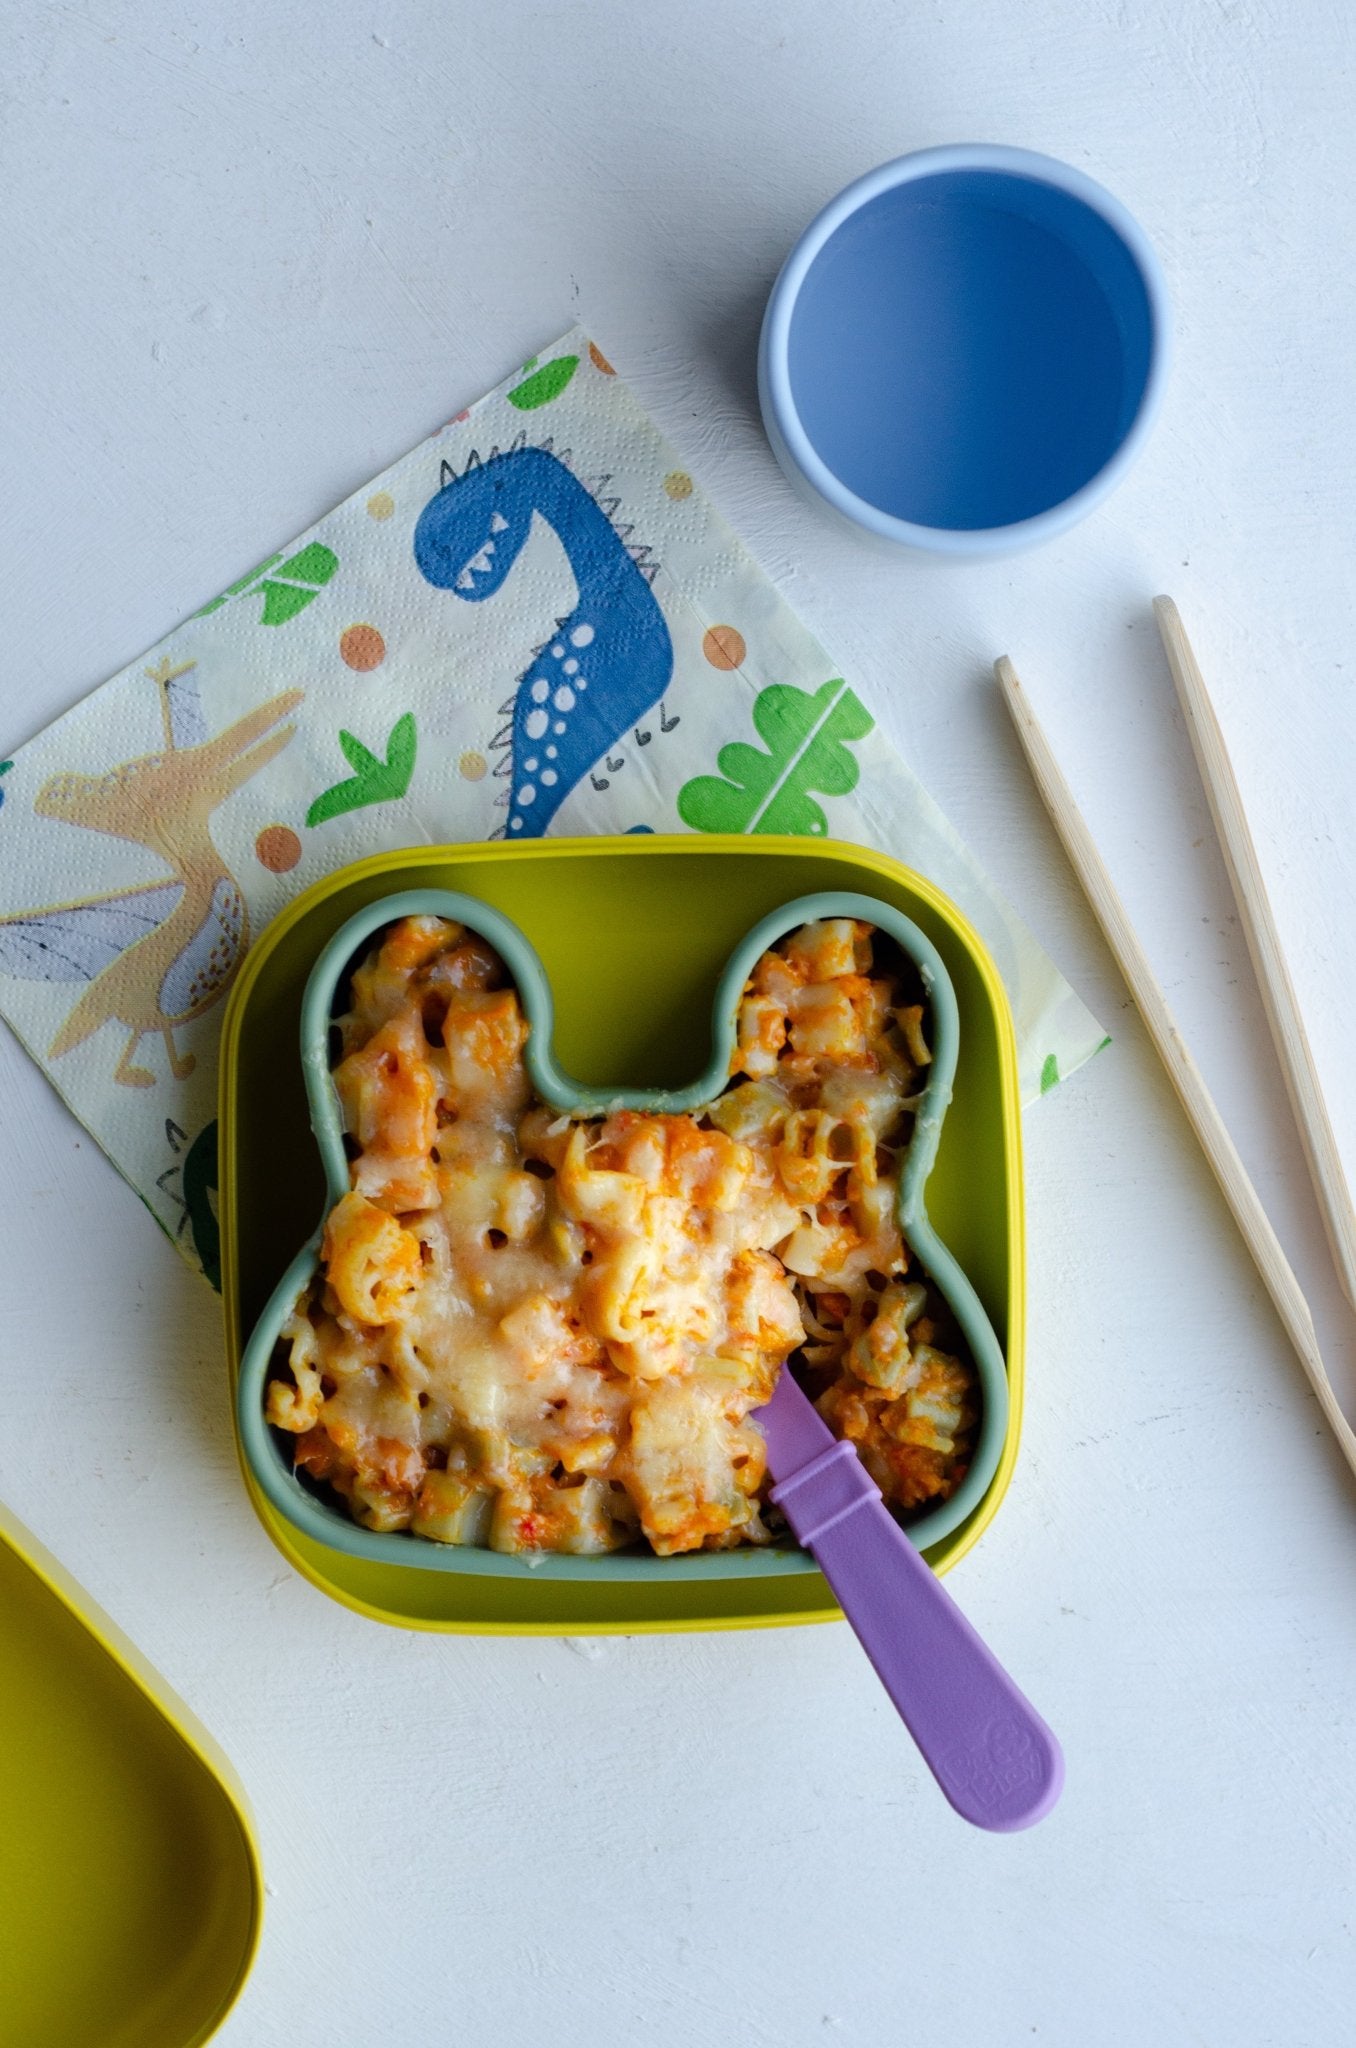 Savoury and Nutritious: Sweet Potato Mac 'n' Cheese for Baby-Led Weaning